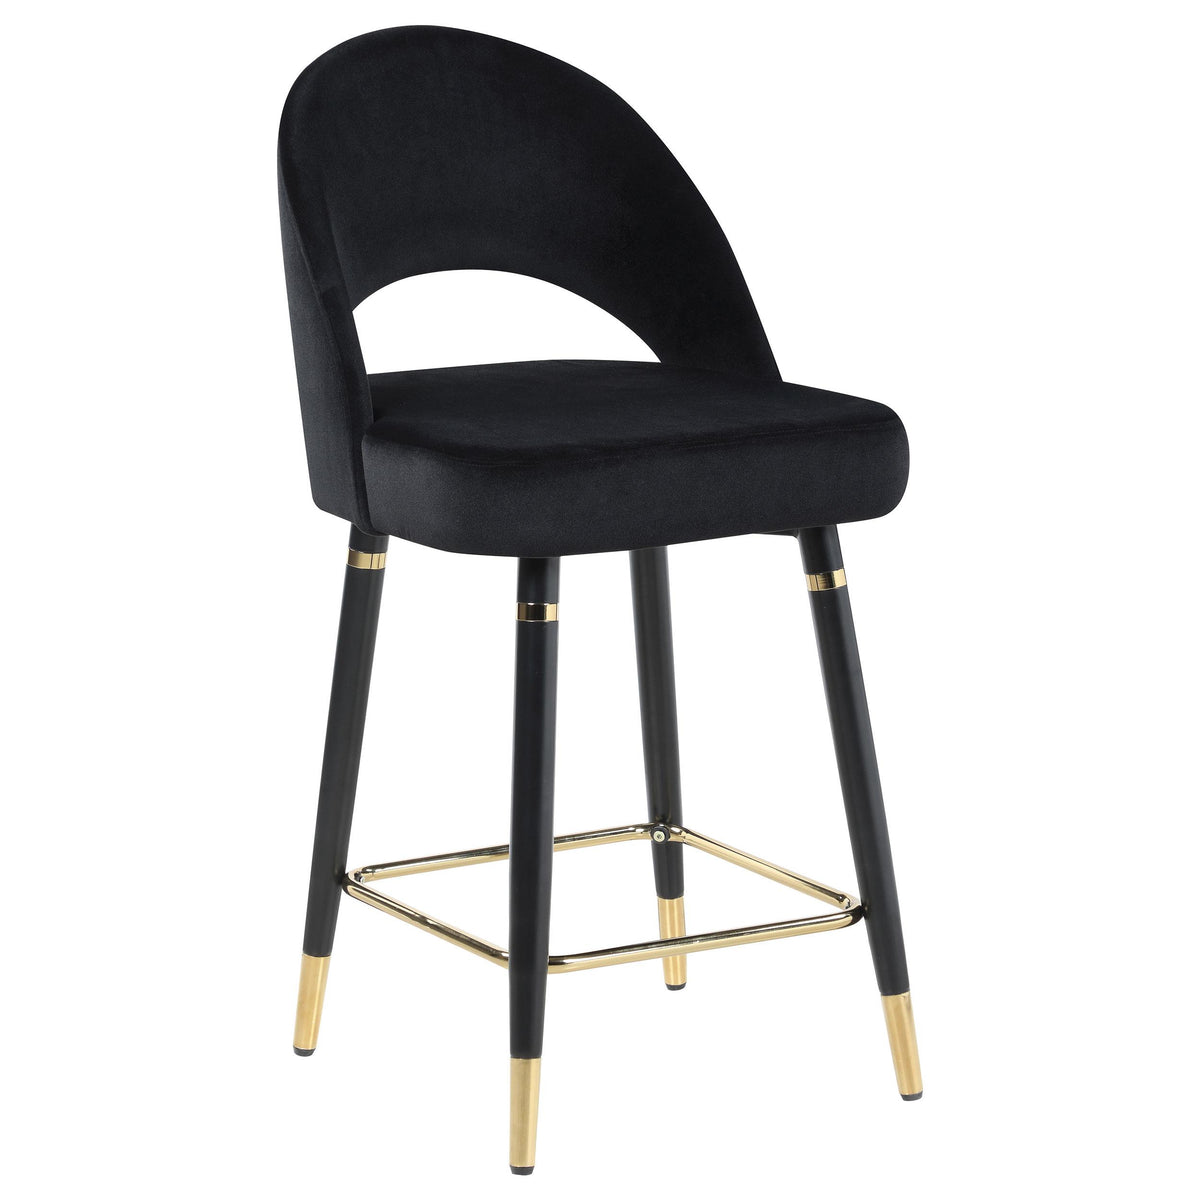 Lindsey Arched Back Upholstered Counter Height Stools Black (Set of 2) Lindsey Arched Back Upholstered Counter Height Stools Black (Set of 2) Half Price Furniture